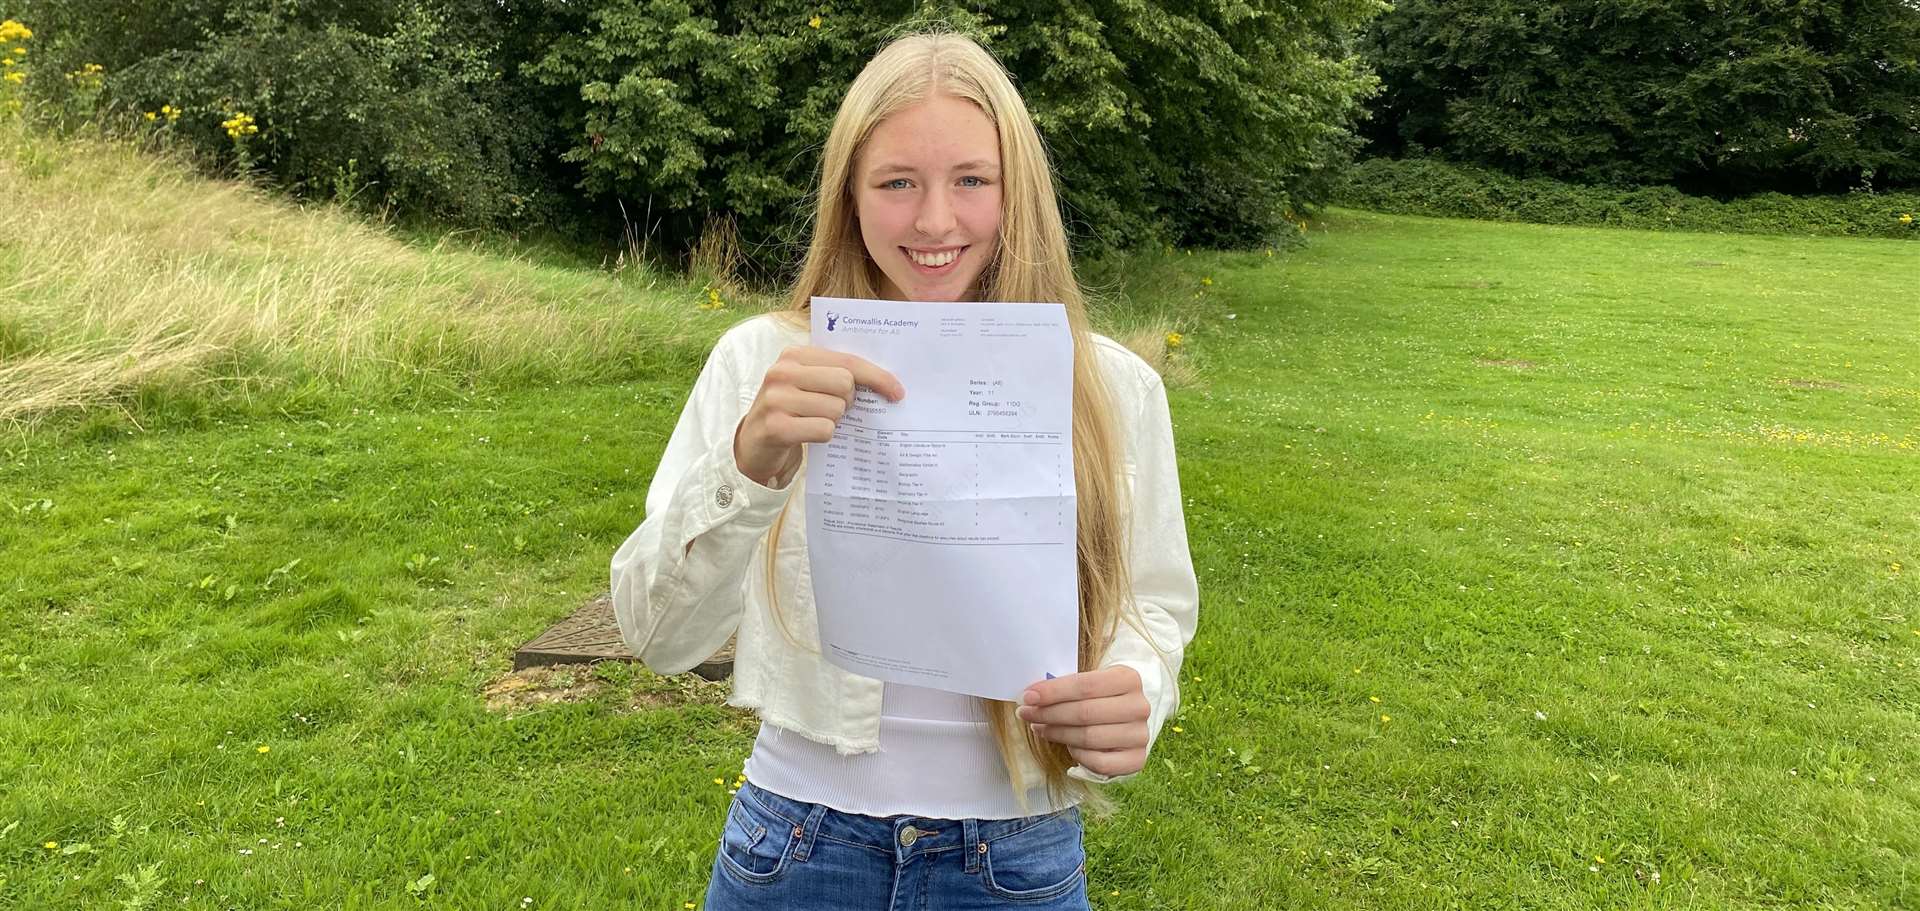 Alicia Nunn from Cornwallis Academy achieved two 9s, two 8s and five 7s